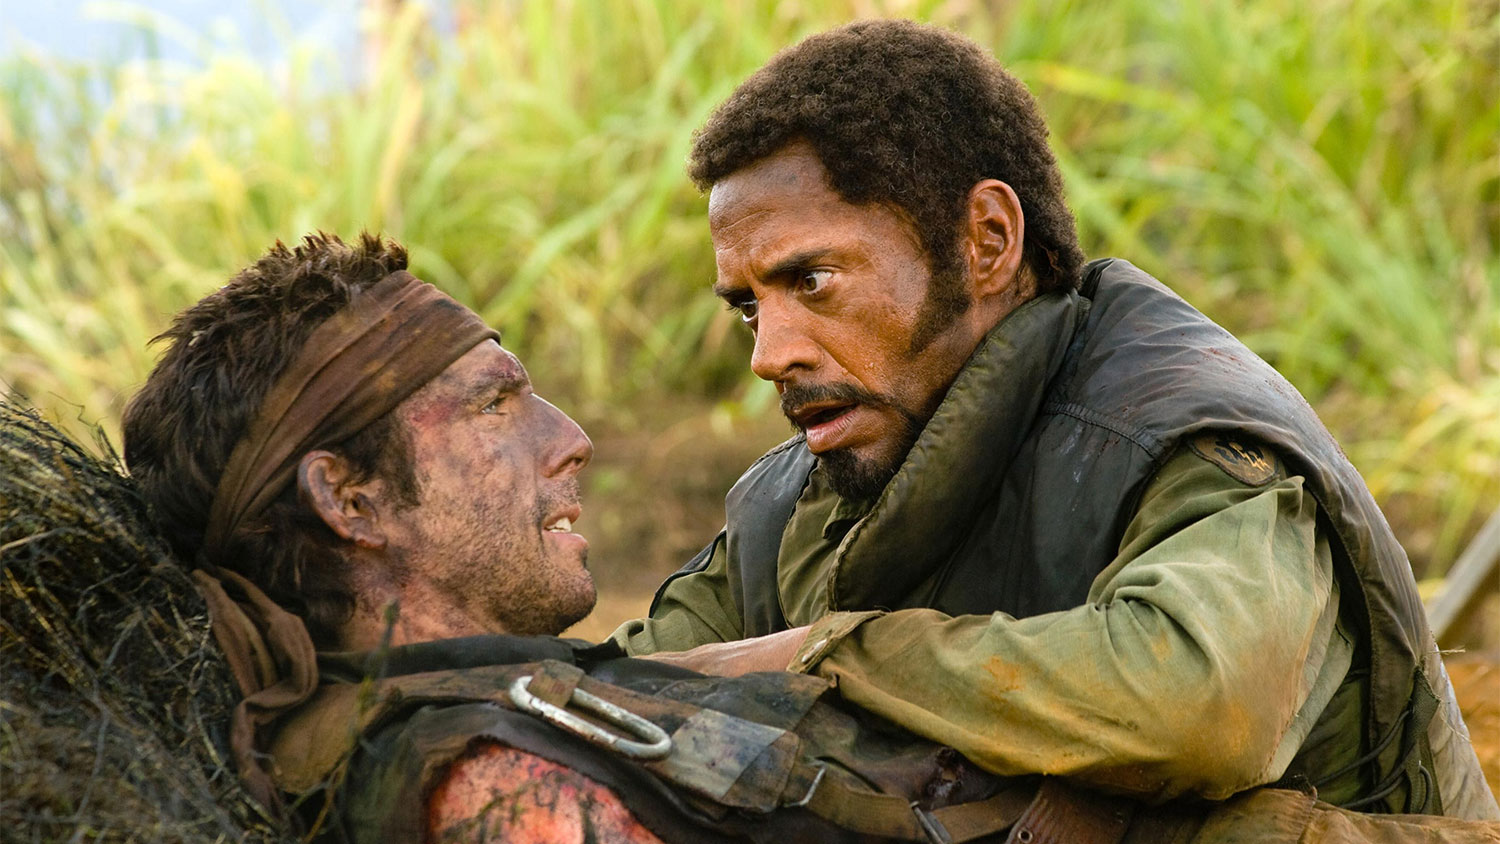 Ben Stiller and Tobert Downey Jr. as Tugg and Kirk shooting a scene in the jungle in the film Tropic Thunder